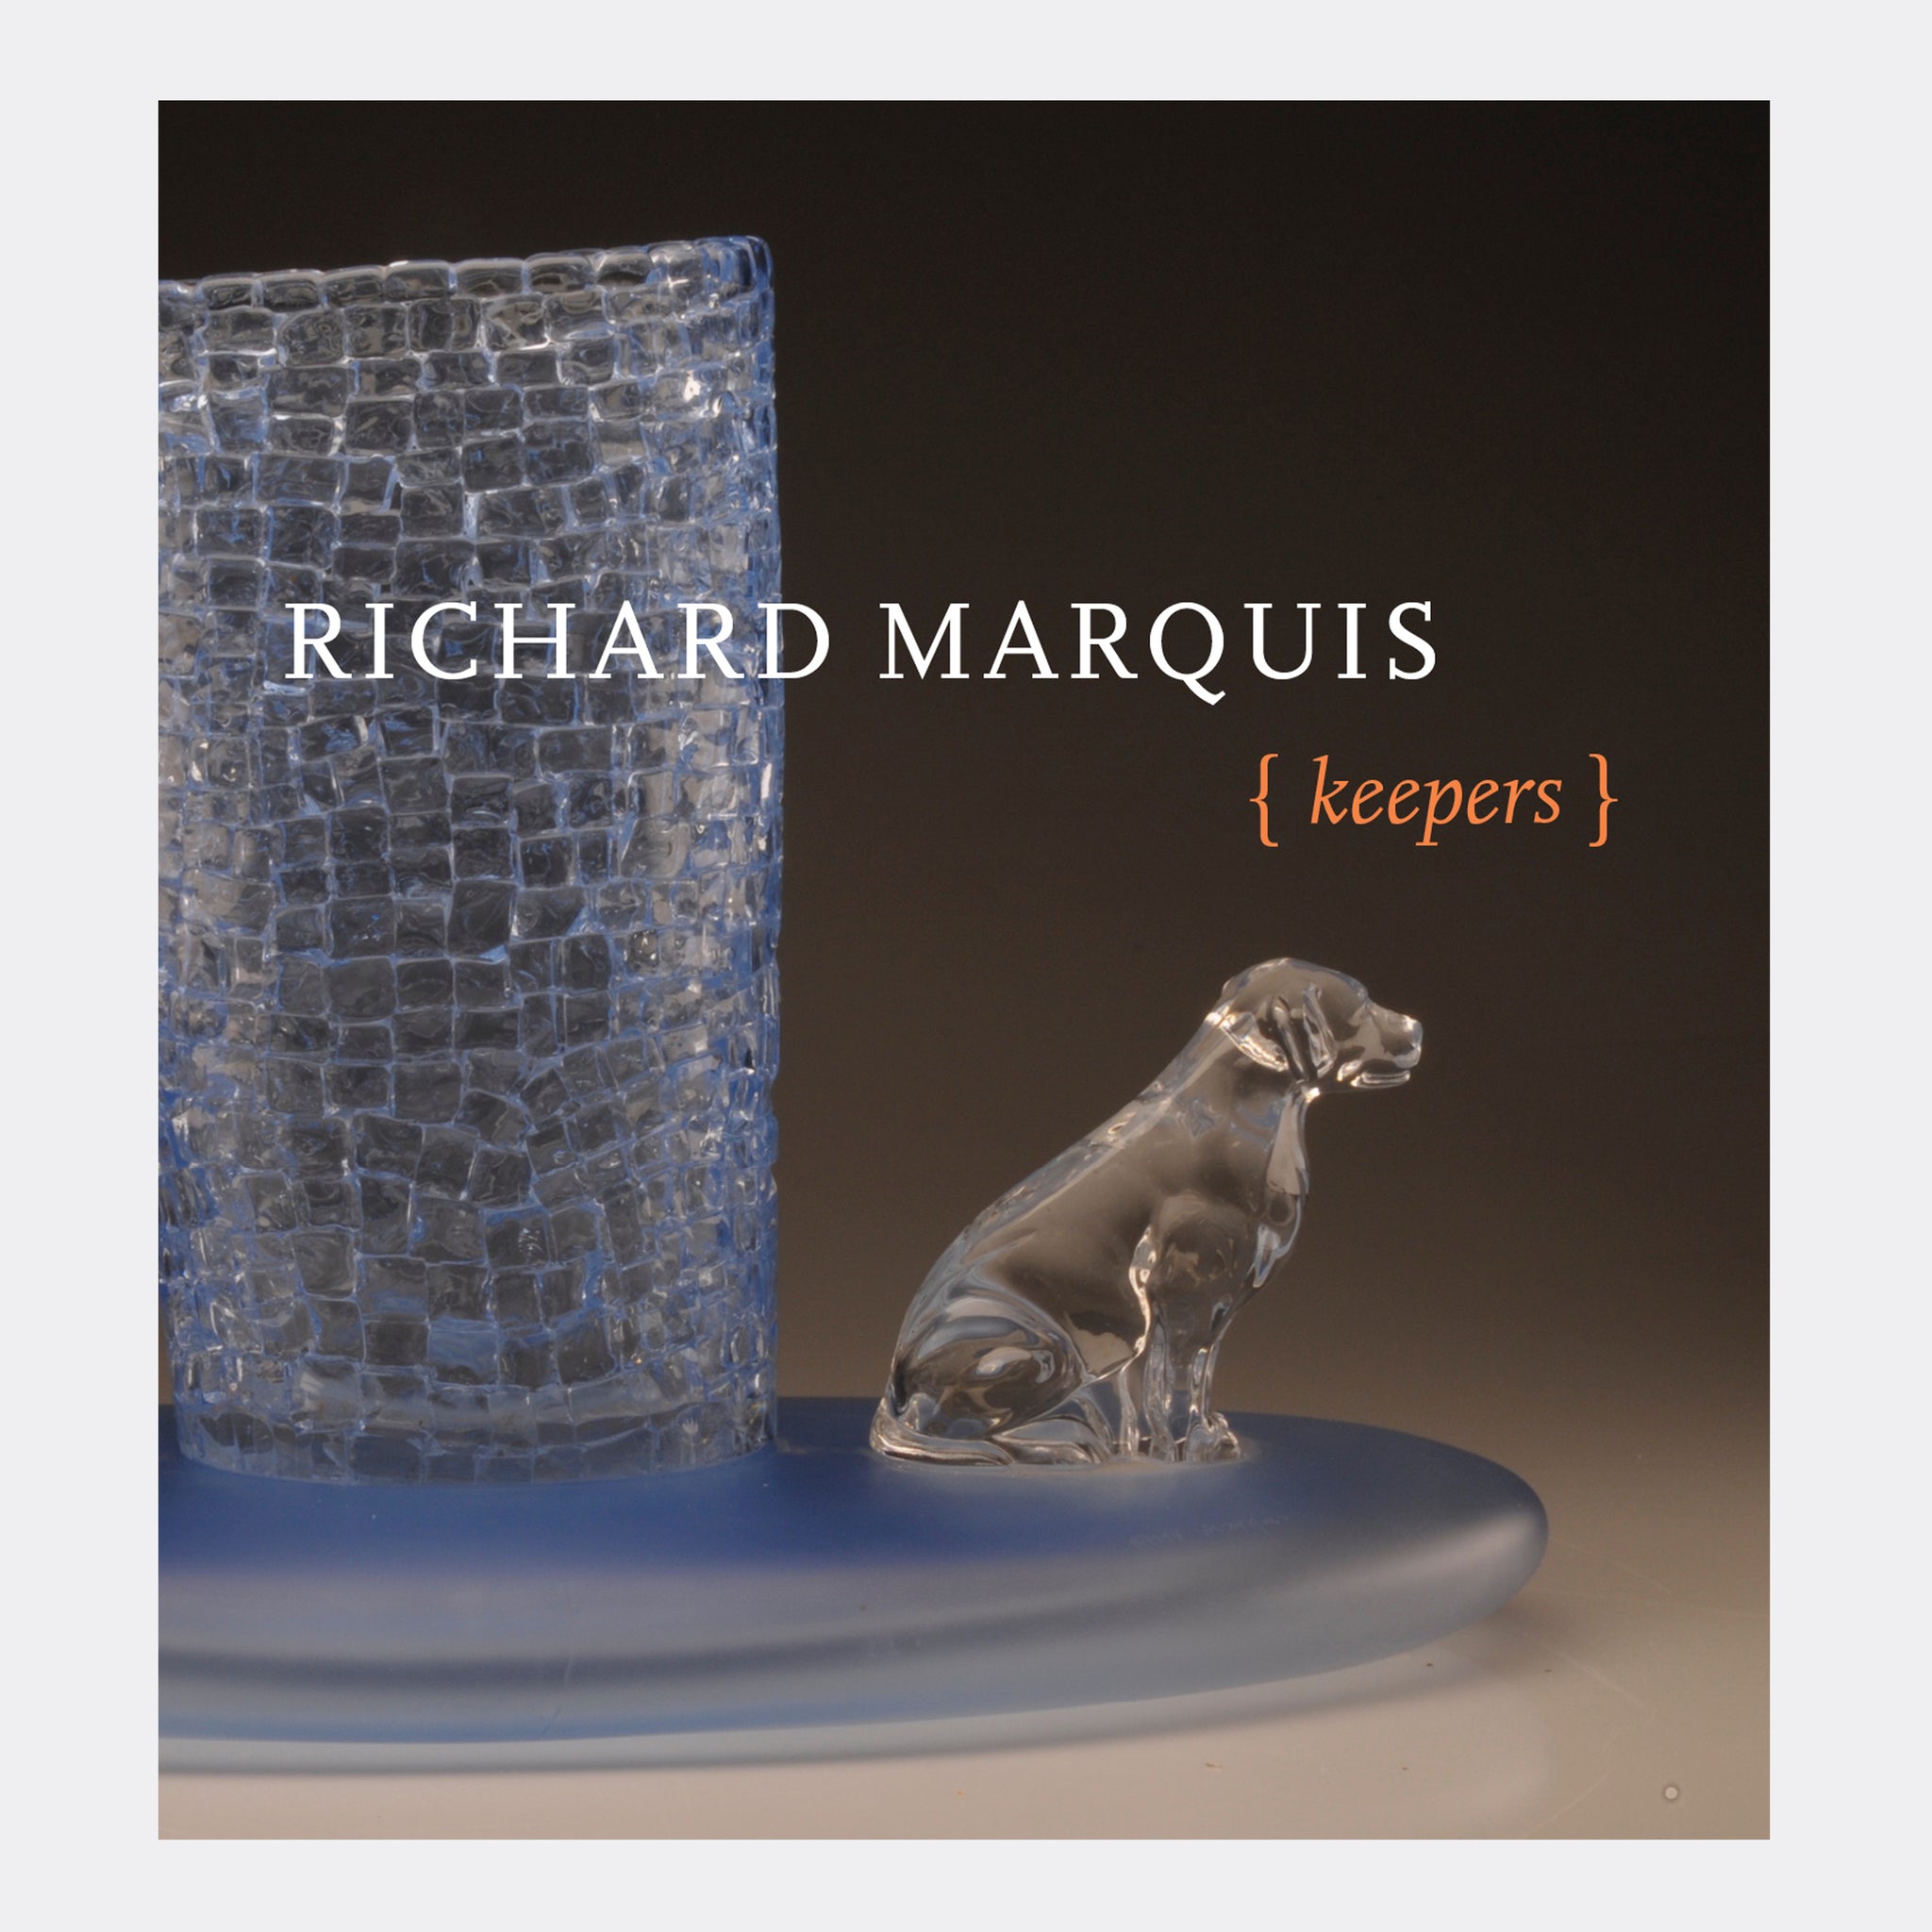 Richard Marquis: Keepers